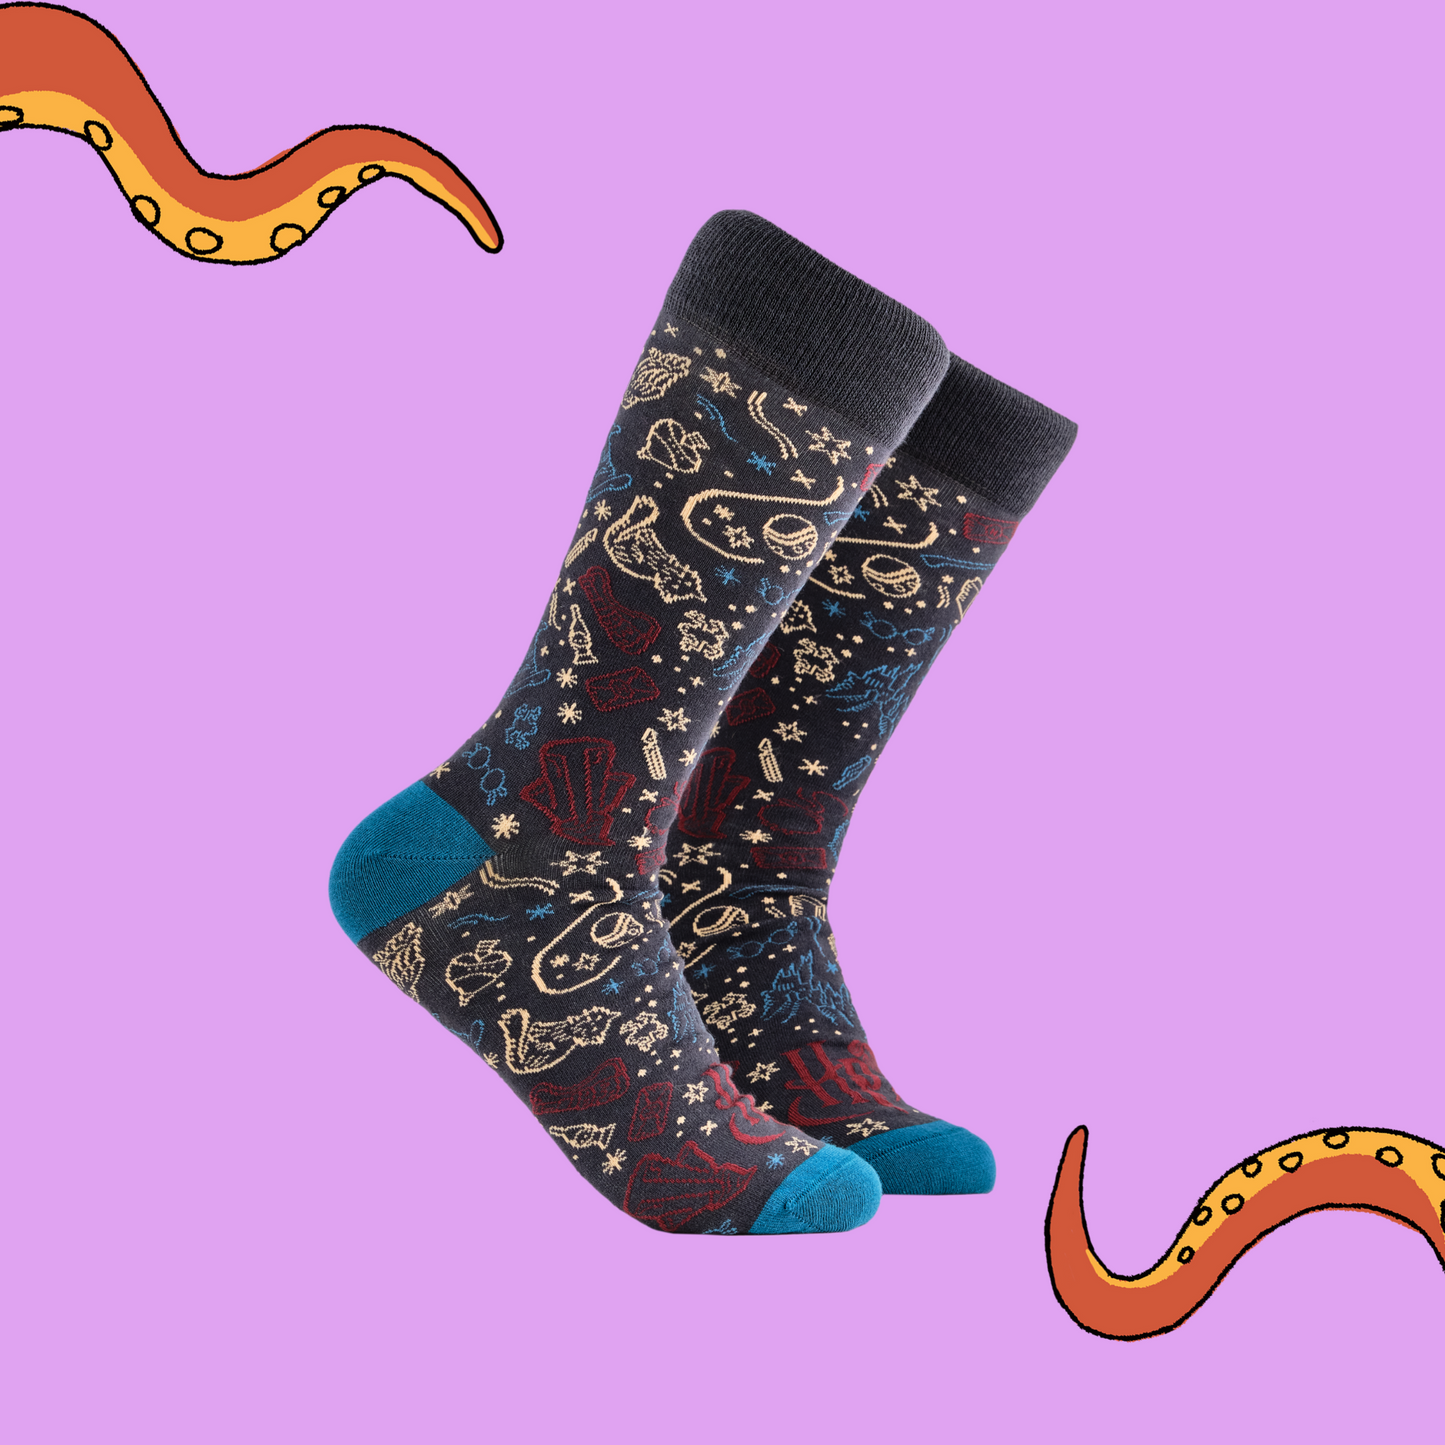 A pair of socks depicting lots of magical elements. Grey legs, blue cuff, heel and toe.